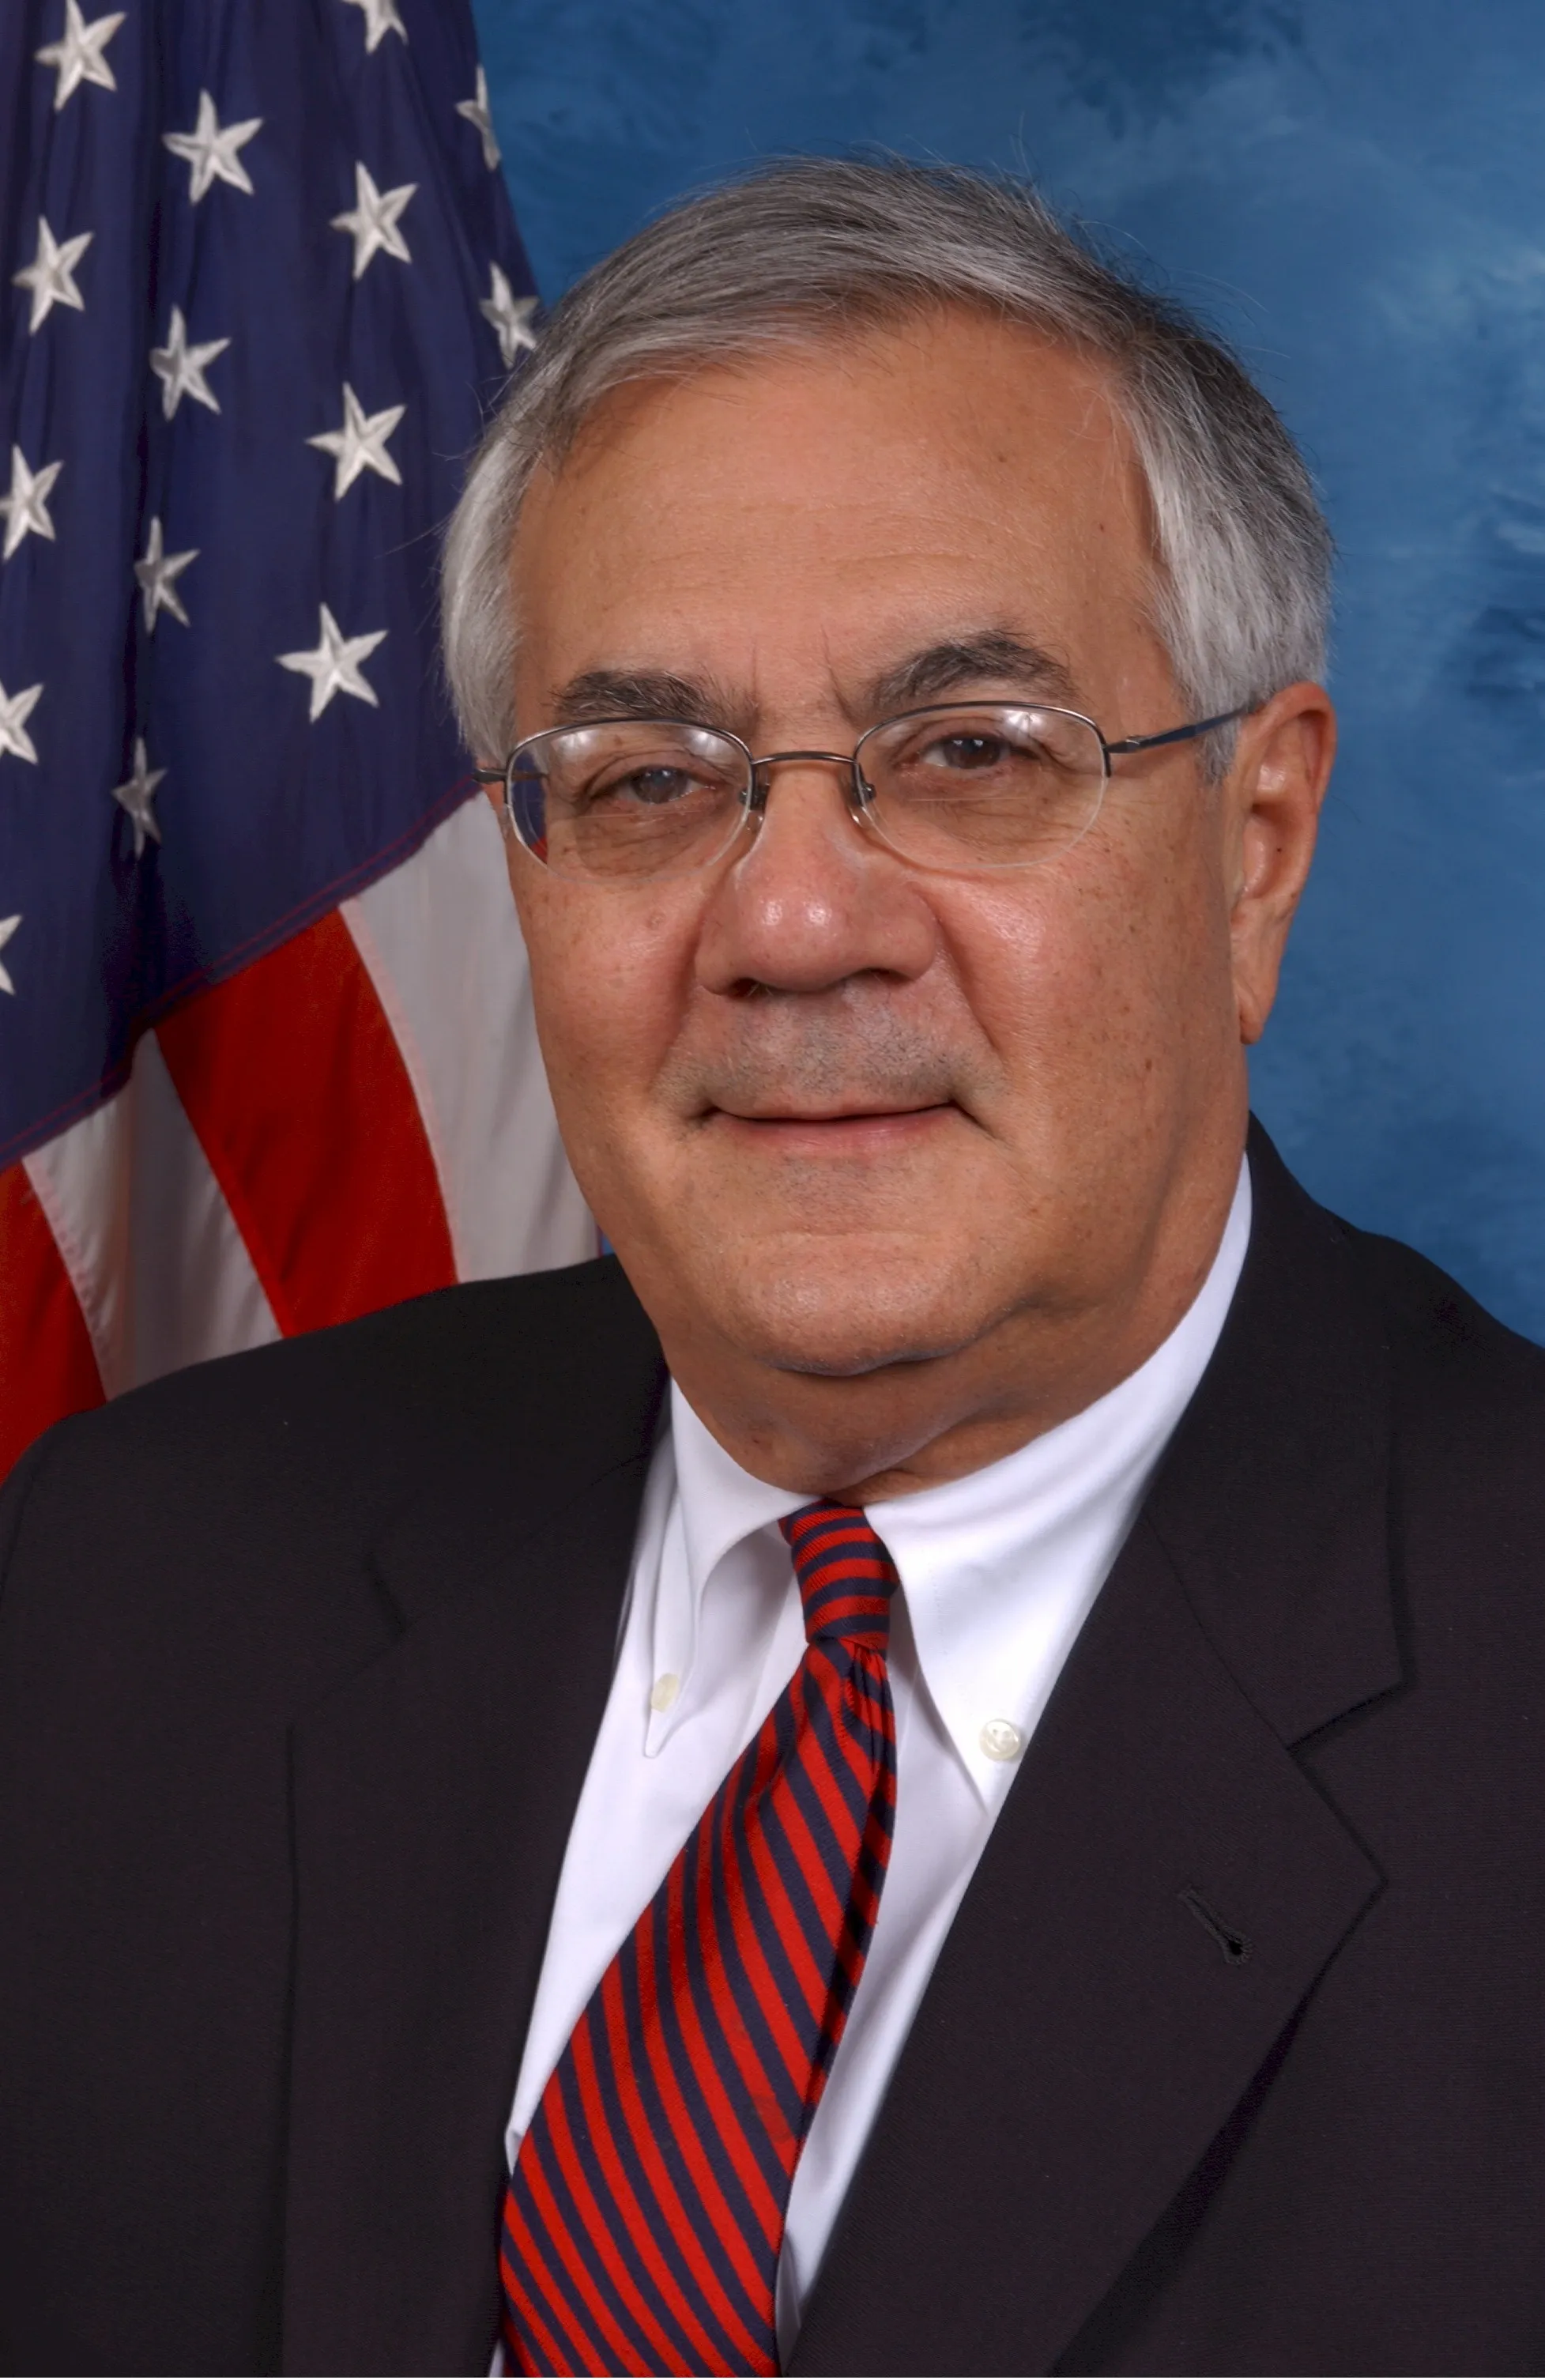 Barney Frank Discusses Online Poker on The Tonight Show With Jay Leno